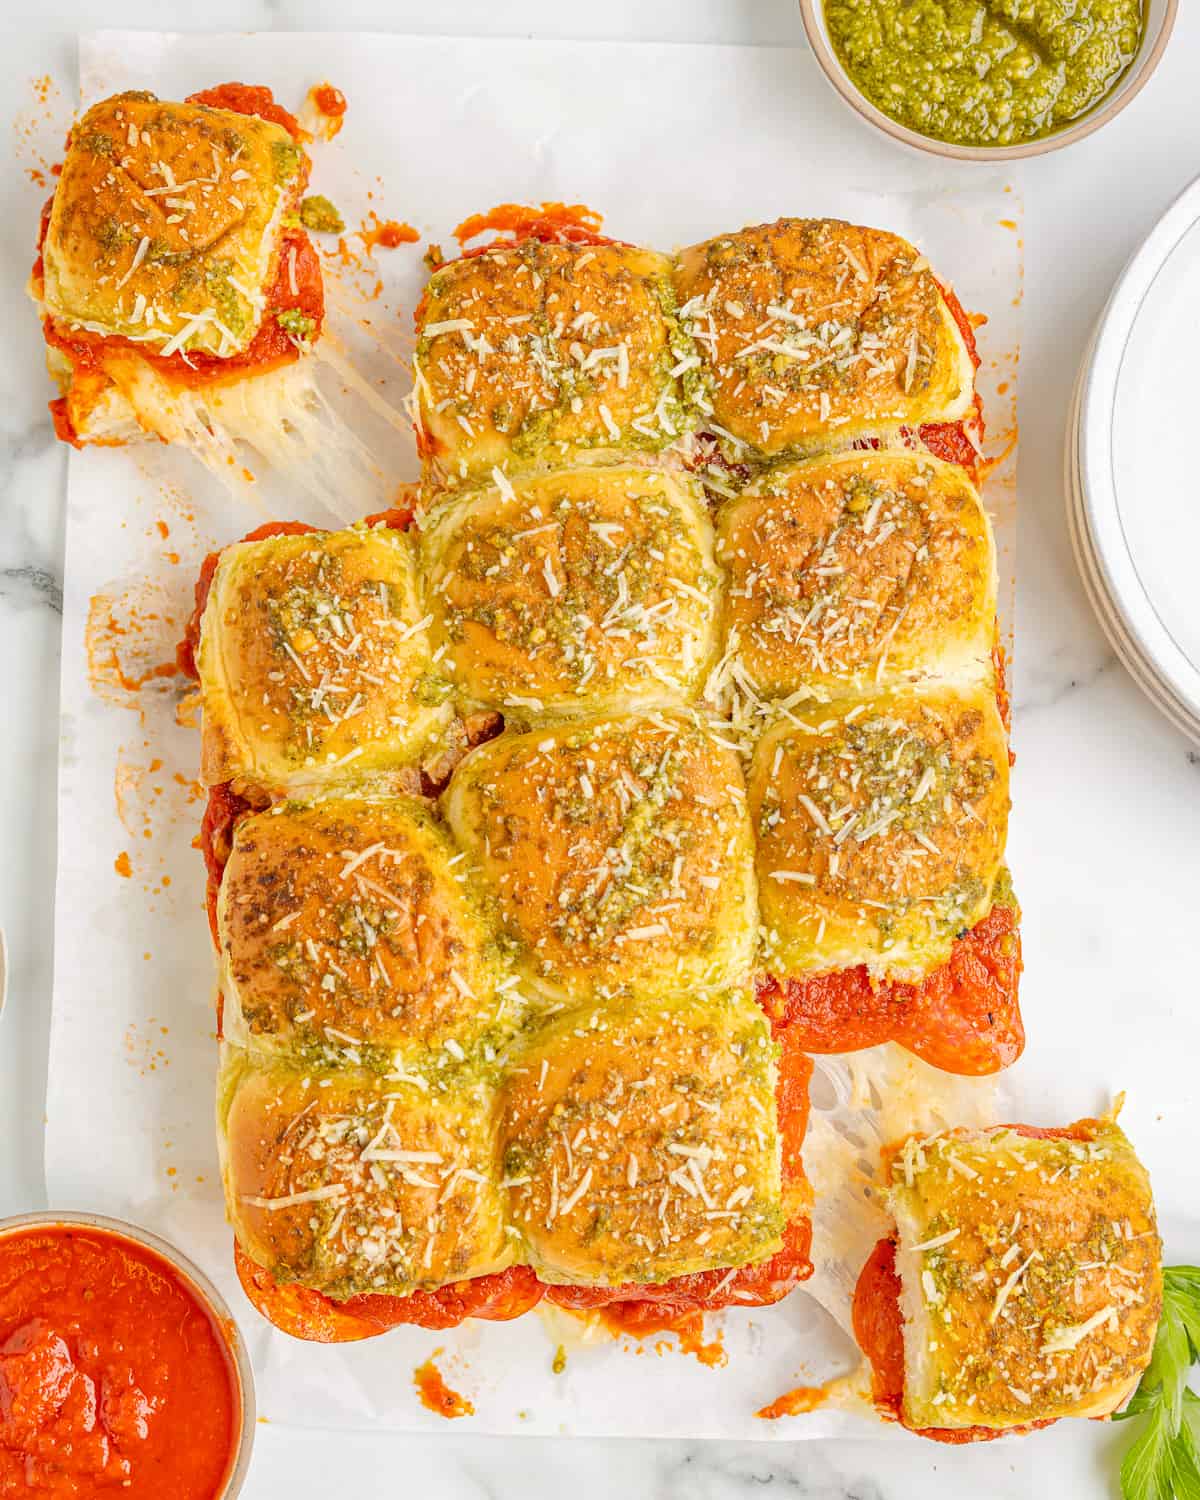 a tray of pizza sliders on a white plate.